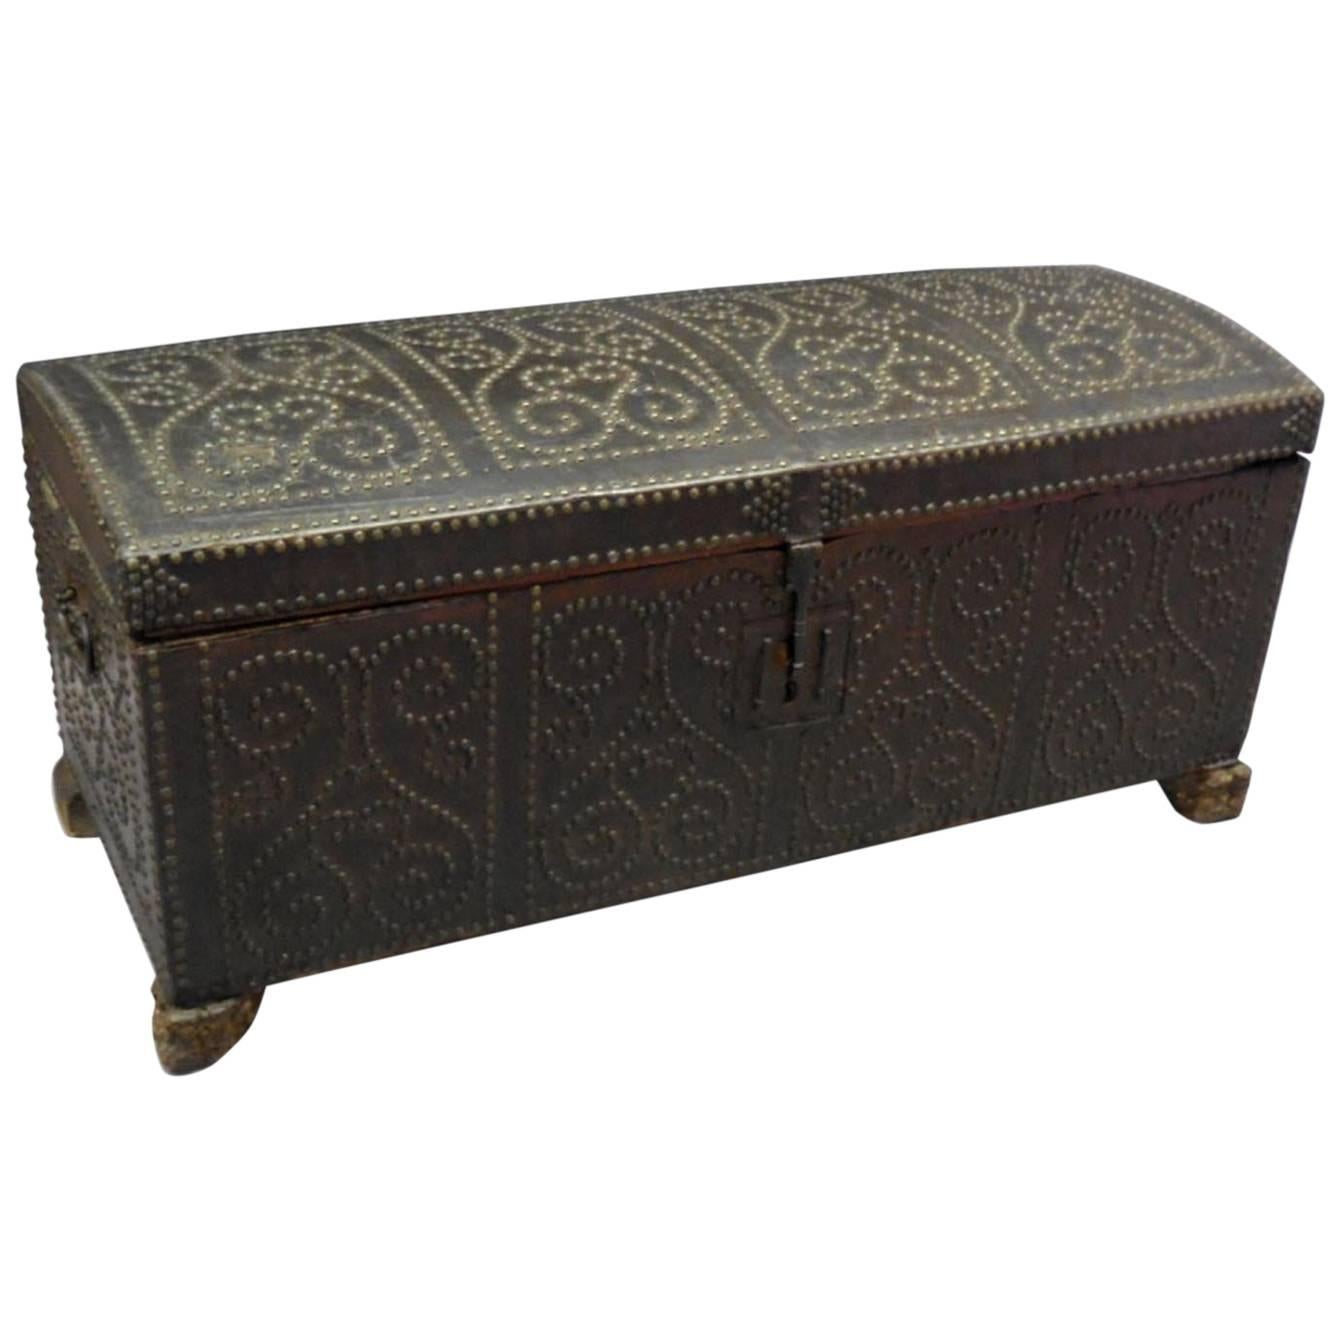 Spanish Colonial Leather Trunk